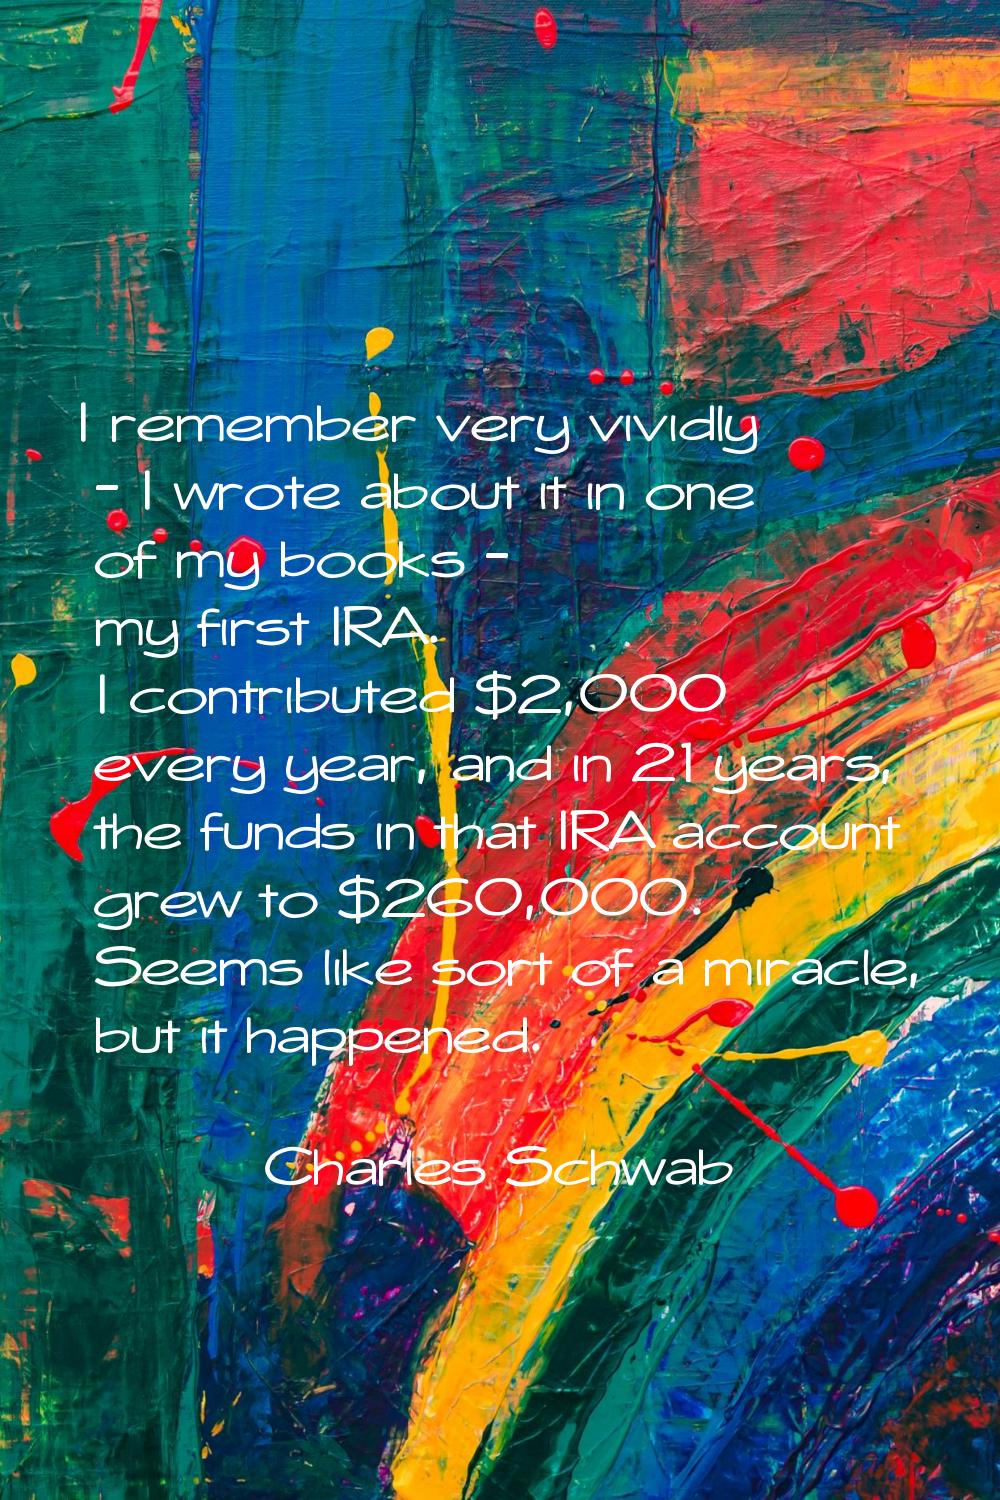 I remember very vividly - I wrote about it in one of my books - my first IRA. I contributed $2,000 